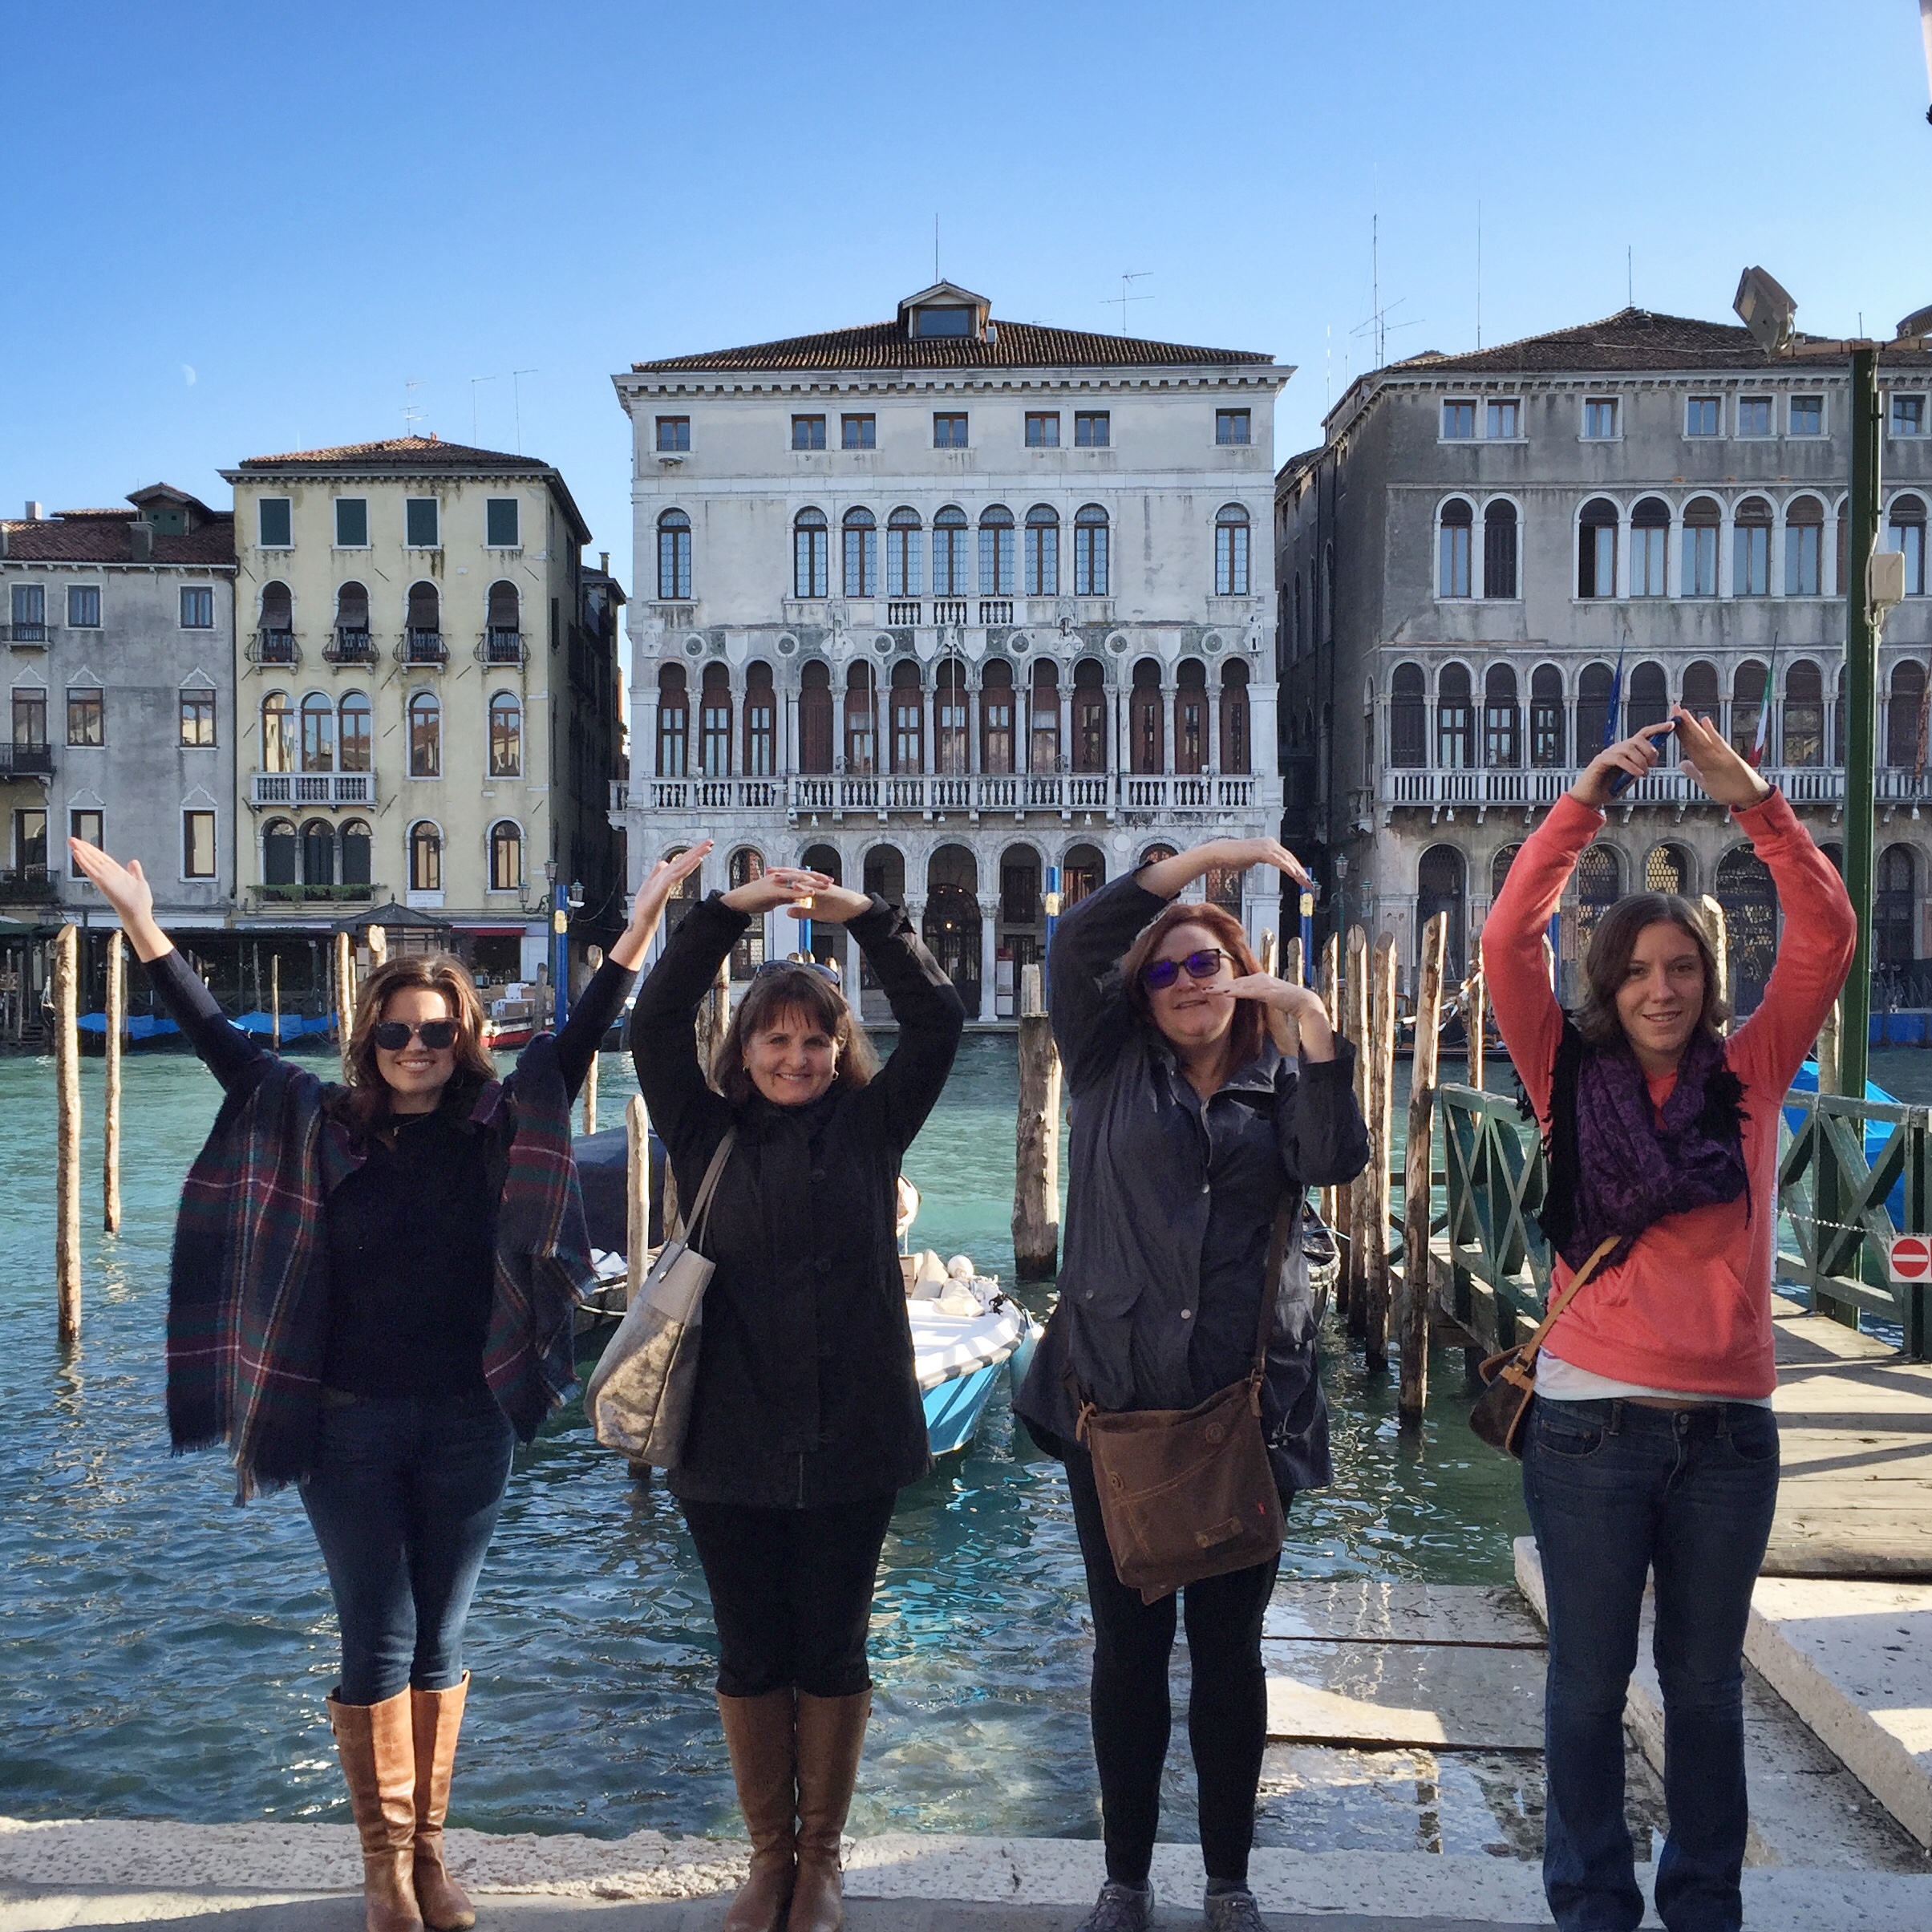 Y.O.G.A by the canals | EAT.PRAY.MOVE Yoga | Venice, Italy